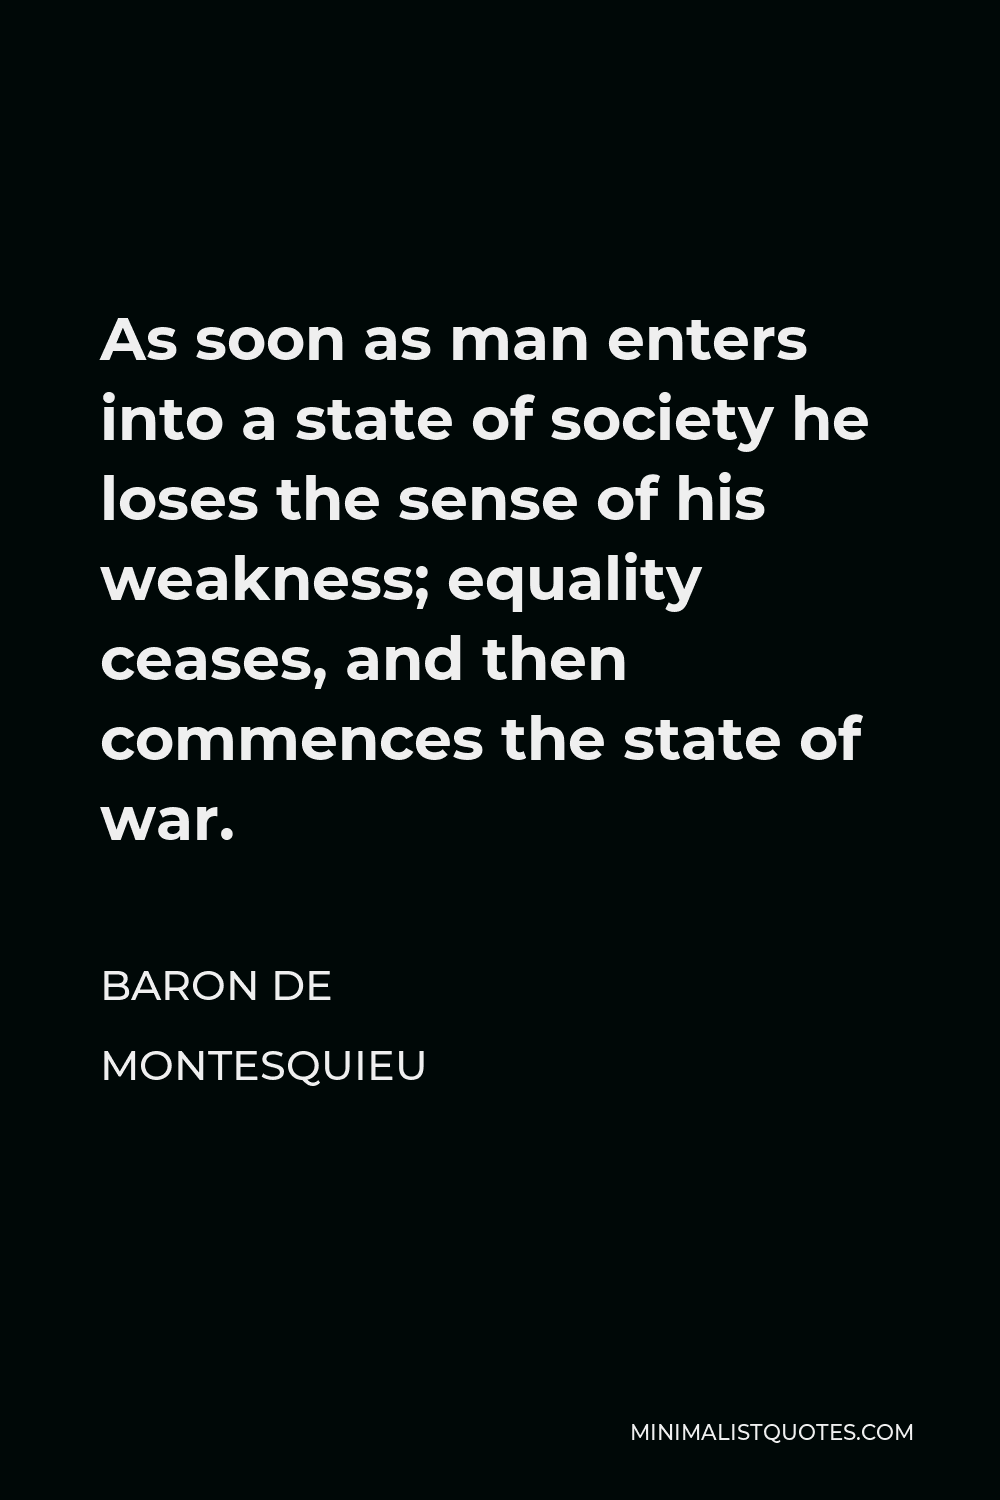 Baron de Montesquieu Quote - As soon as man enters into a state of society he loses the sense of his weakness; equality ceases, and then commences the state of war.